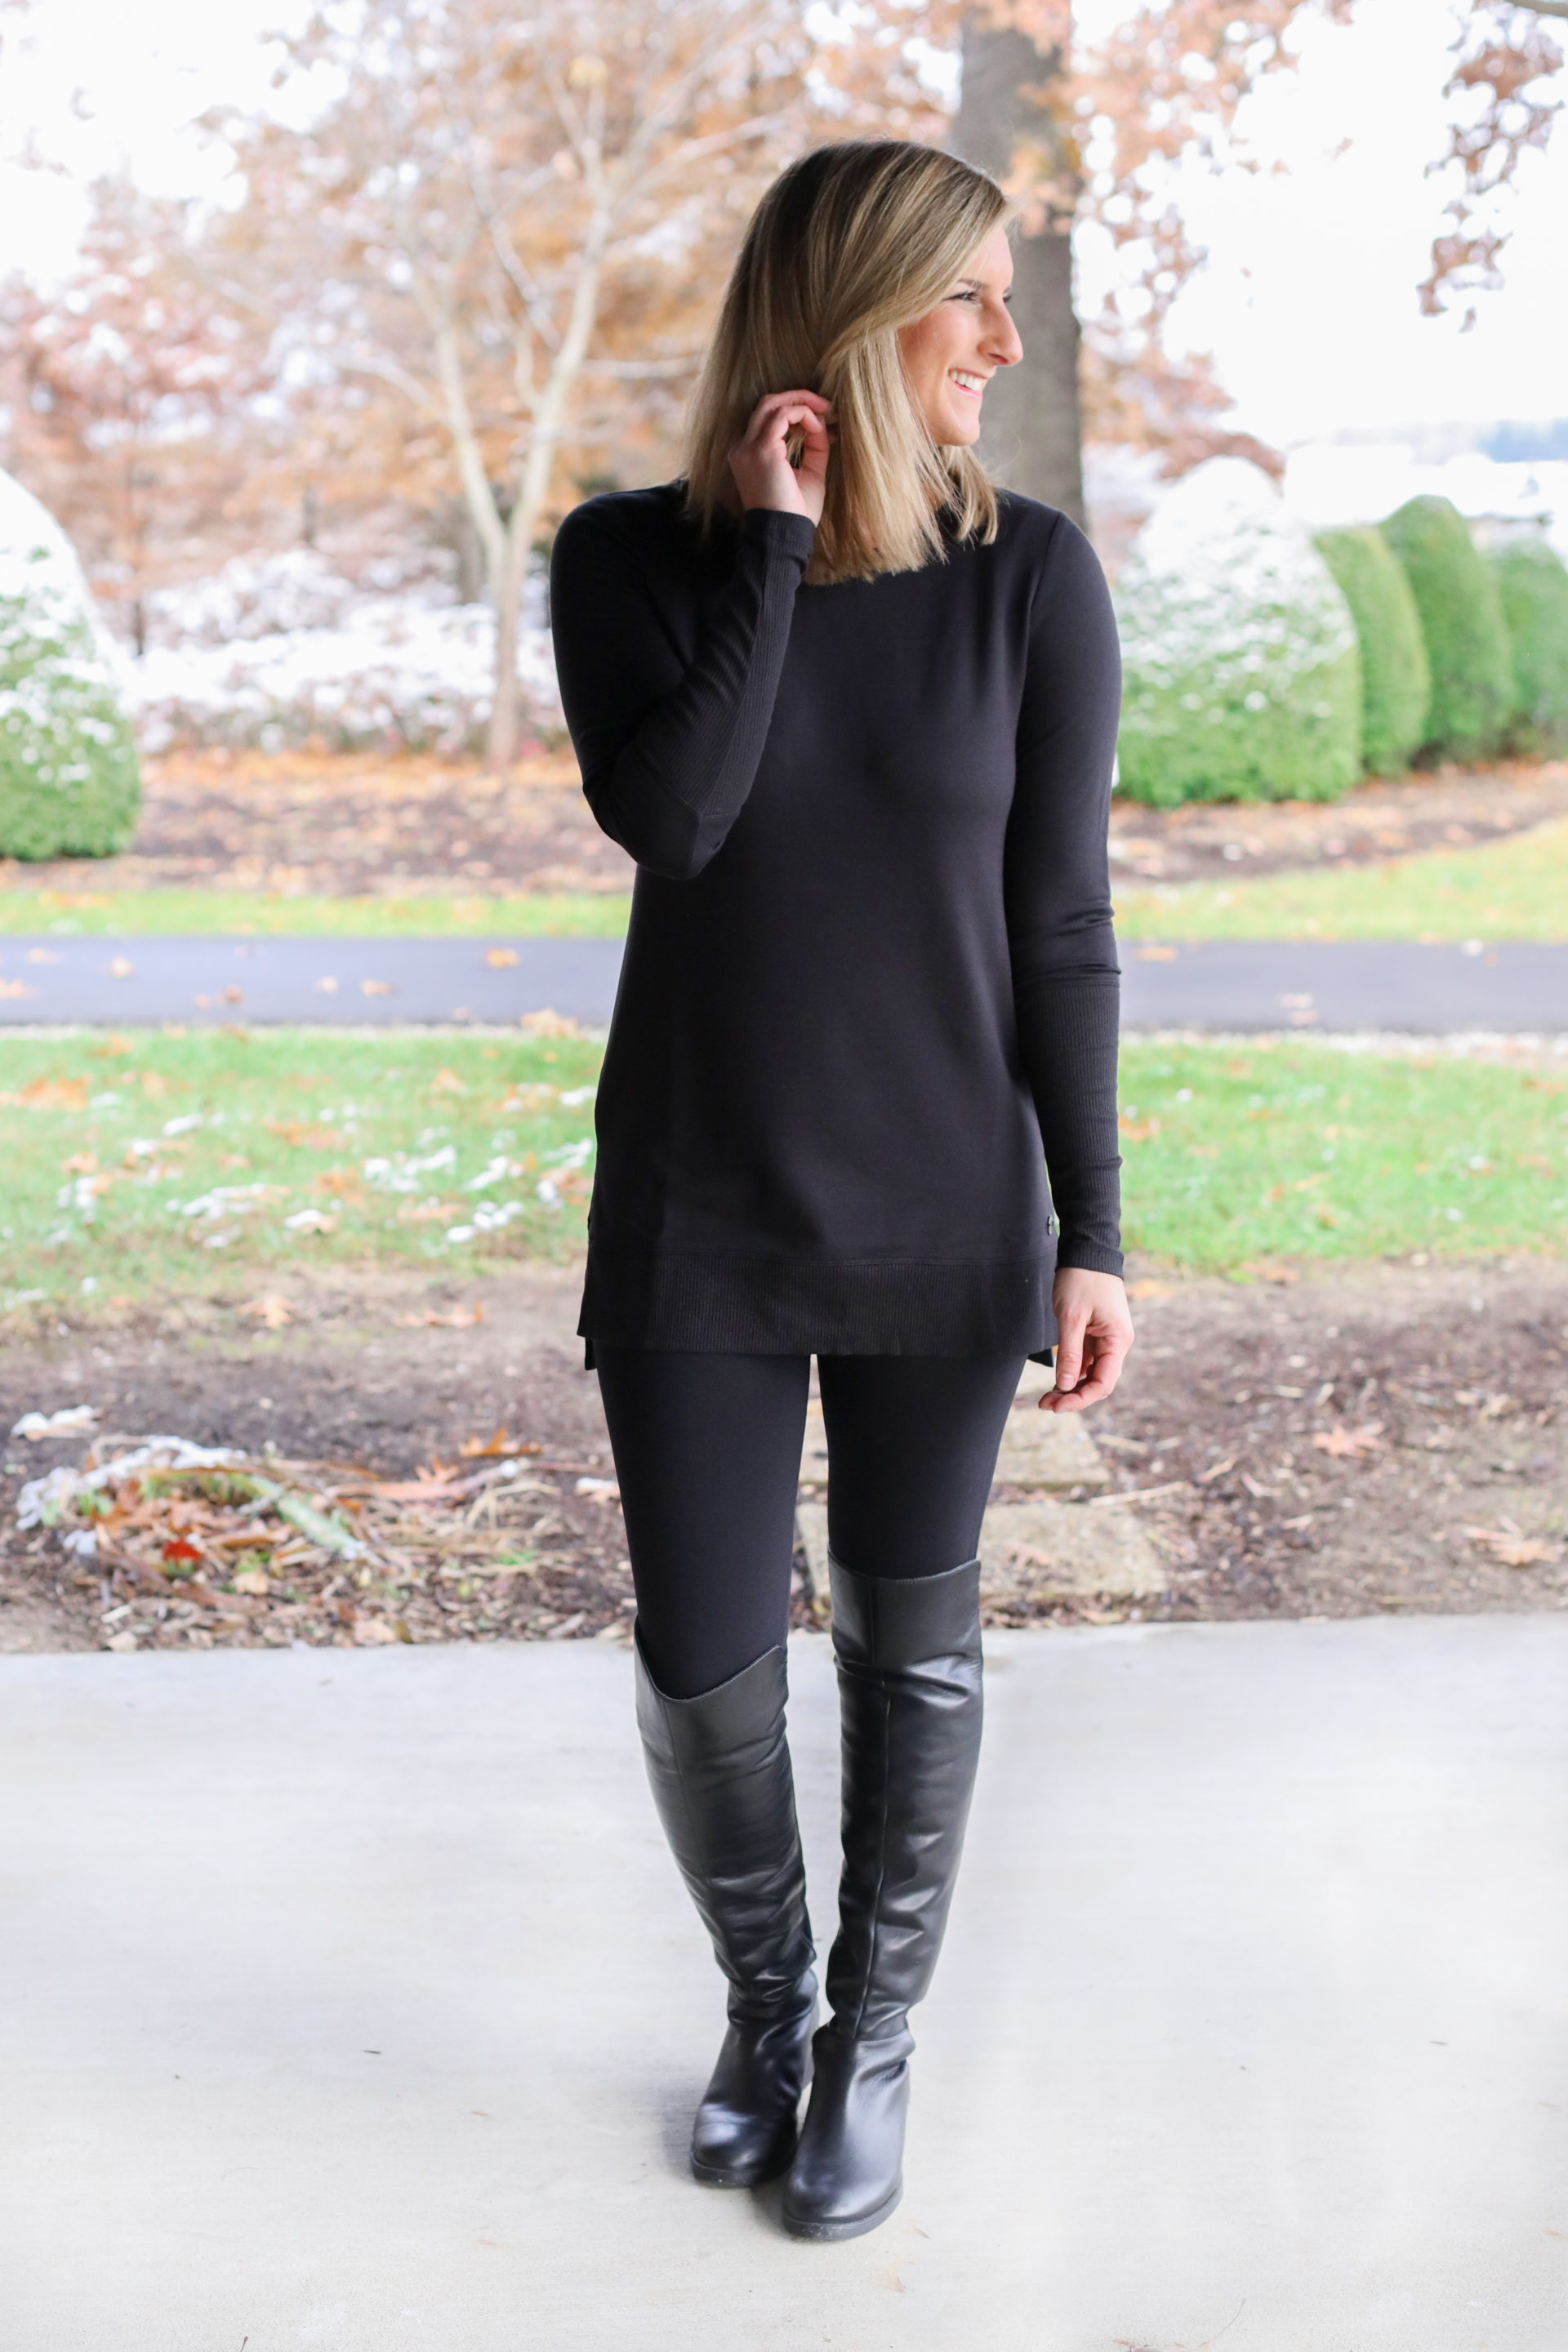 Blue Tunic Top + Faux Leather Leggings, Lady in Violet